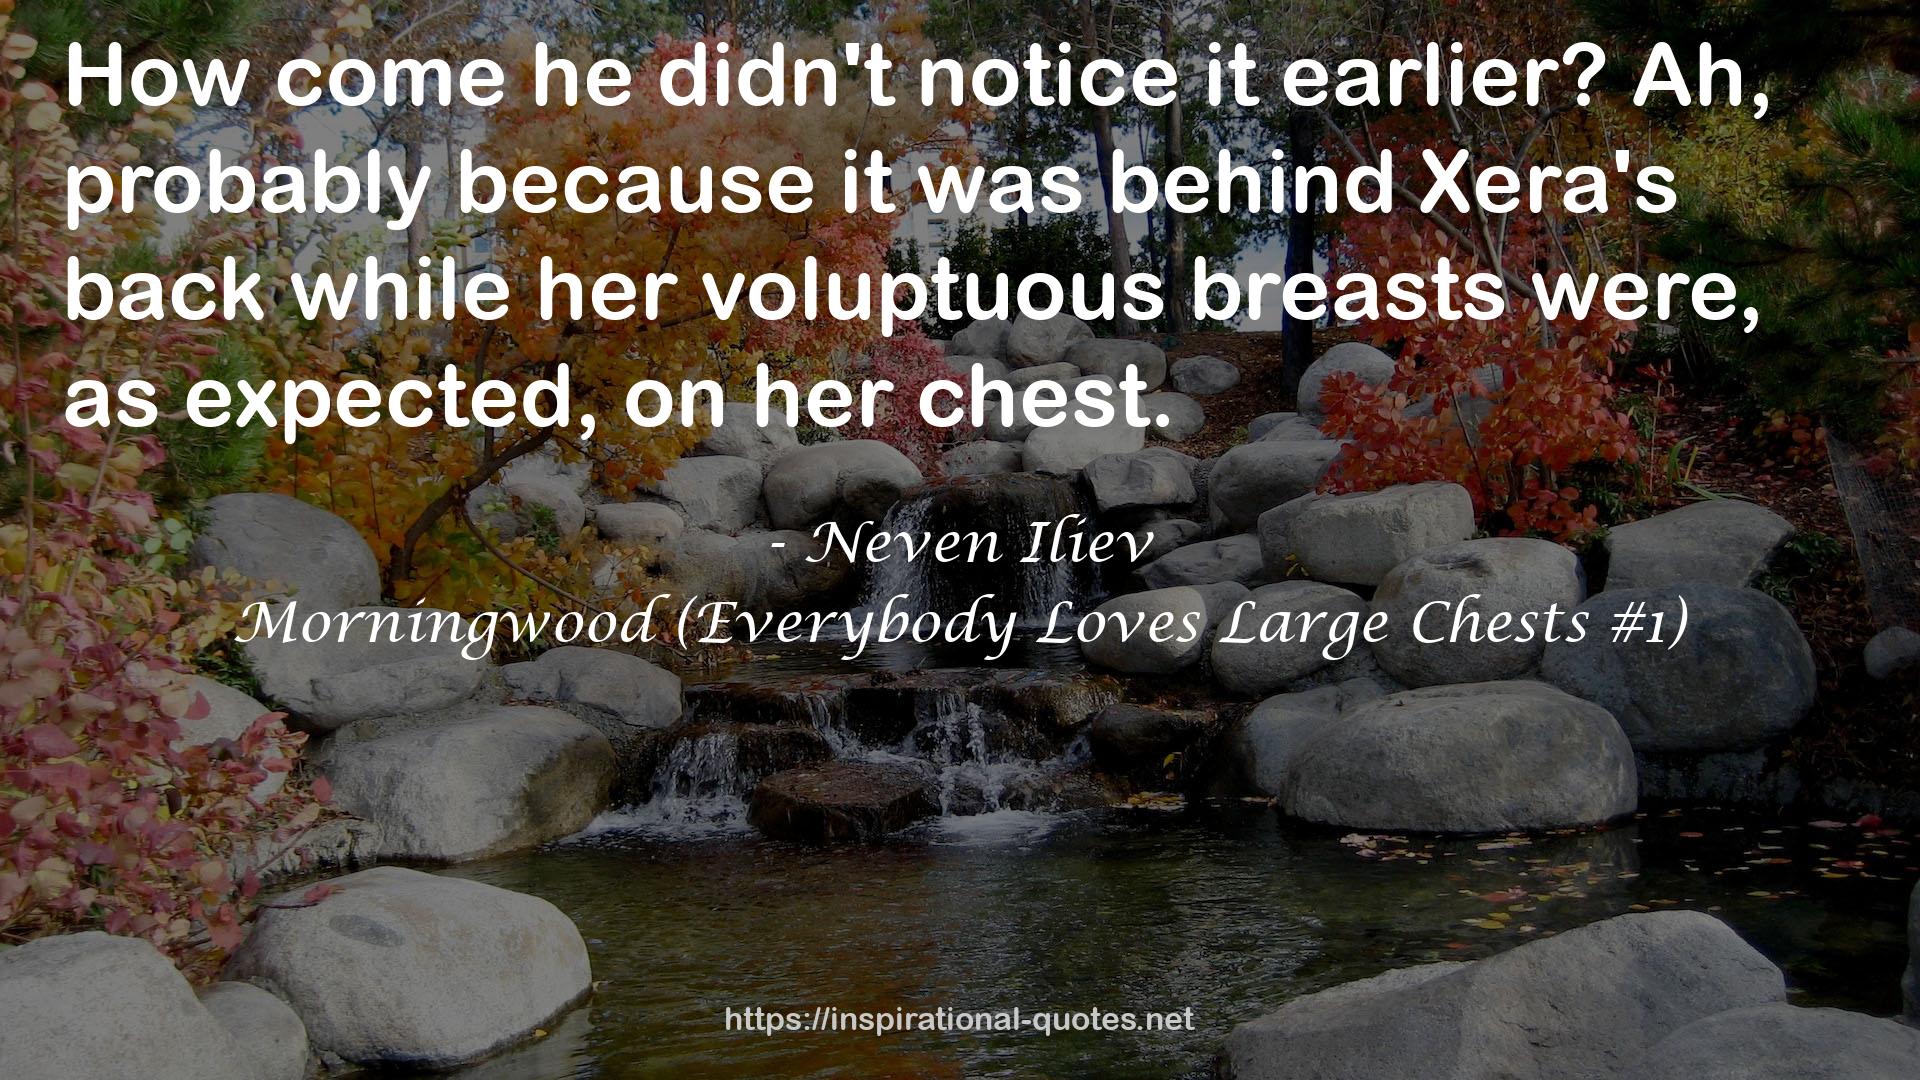 Morningwood (Everybody Loves Large Chests #1) QUOTES